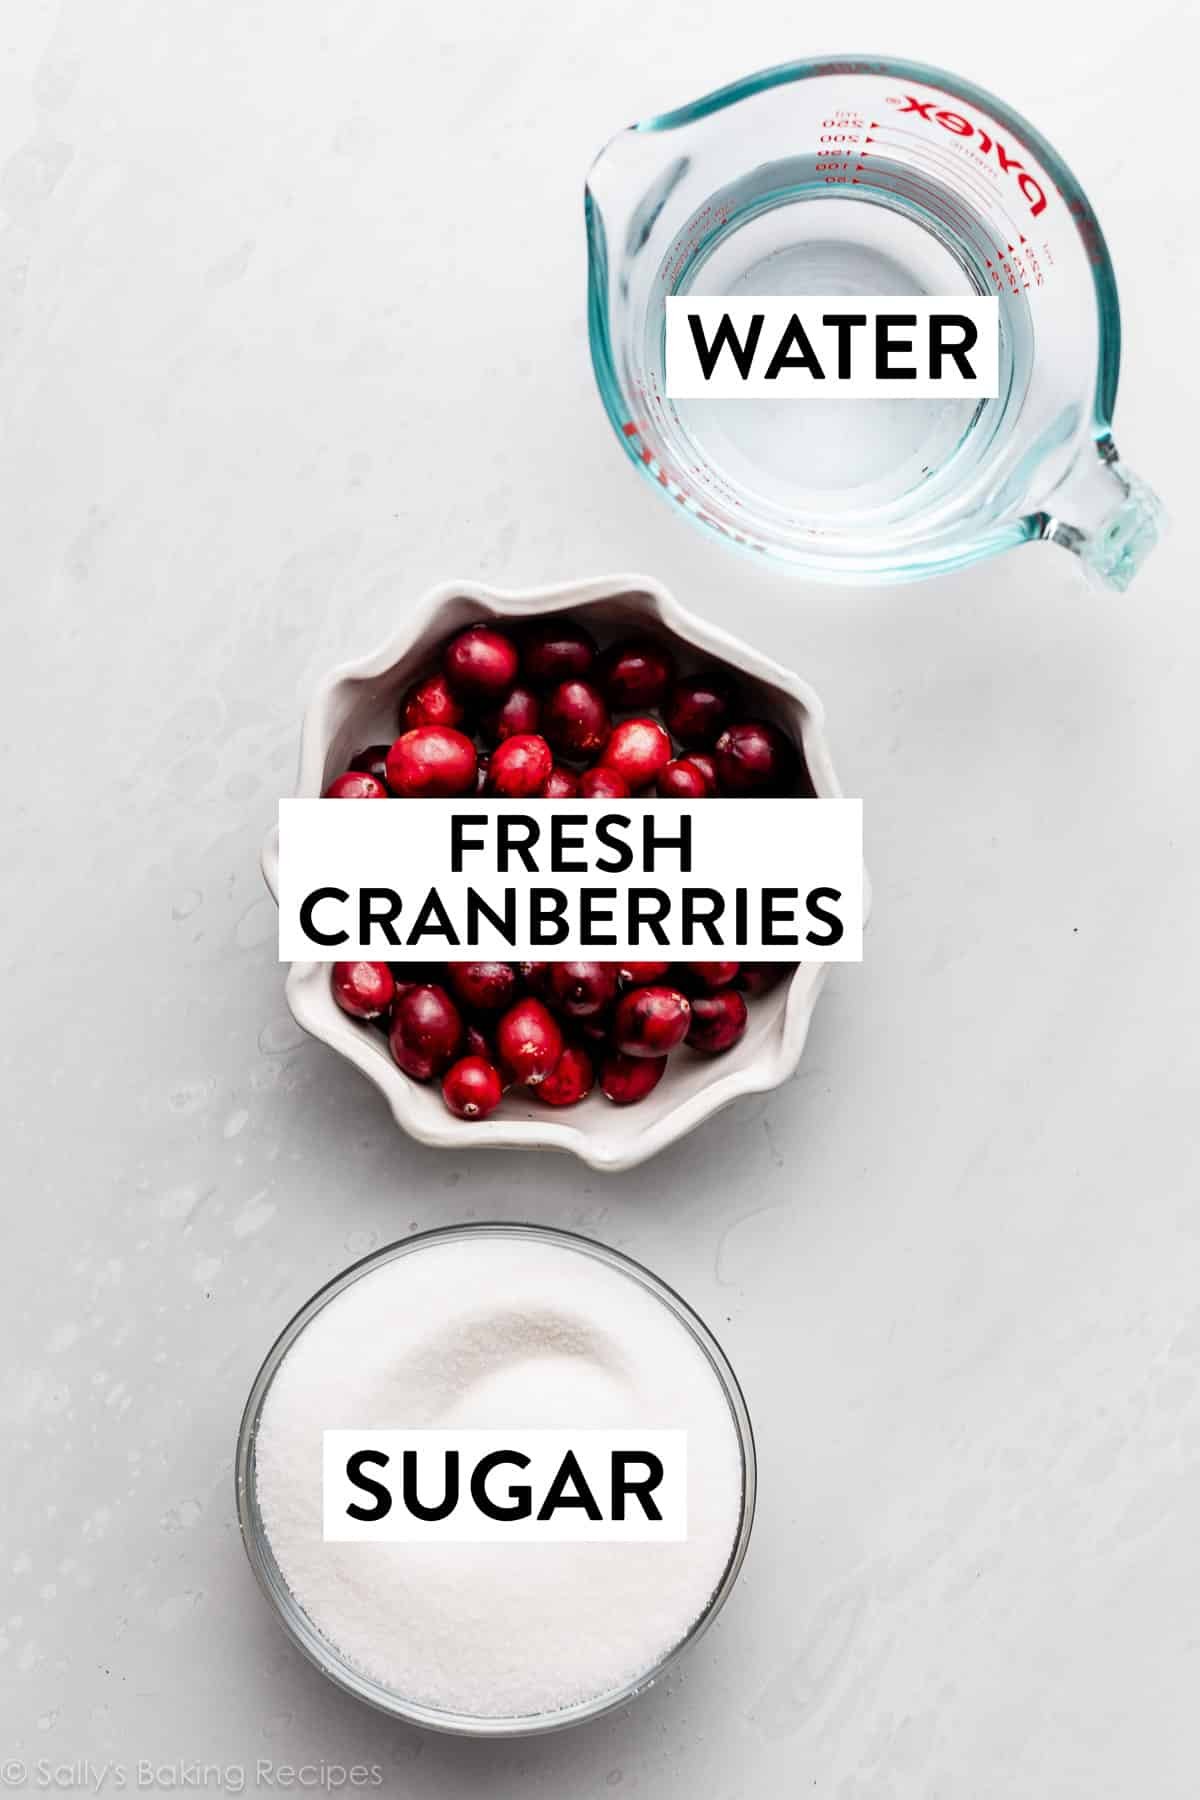 fresh cranberries, water, and sugar in bowls on counter.